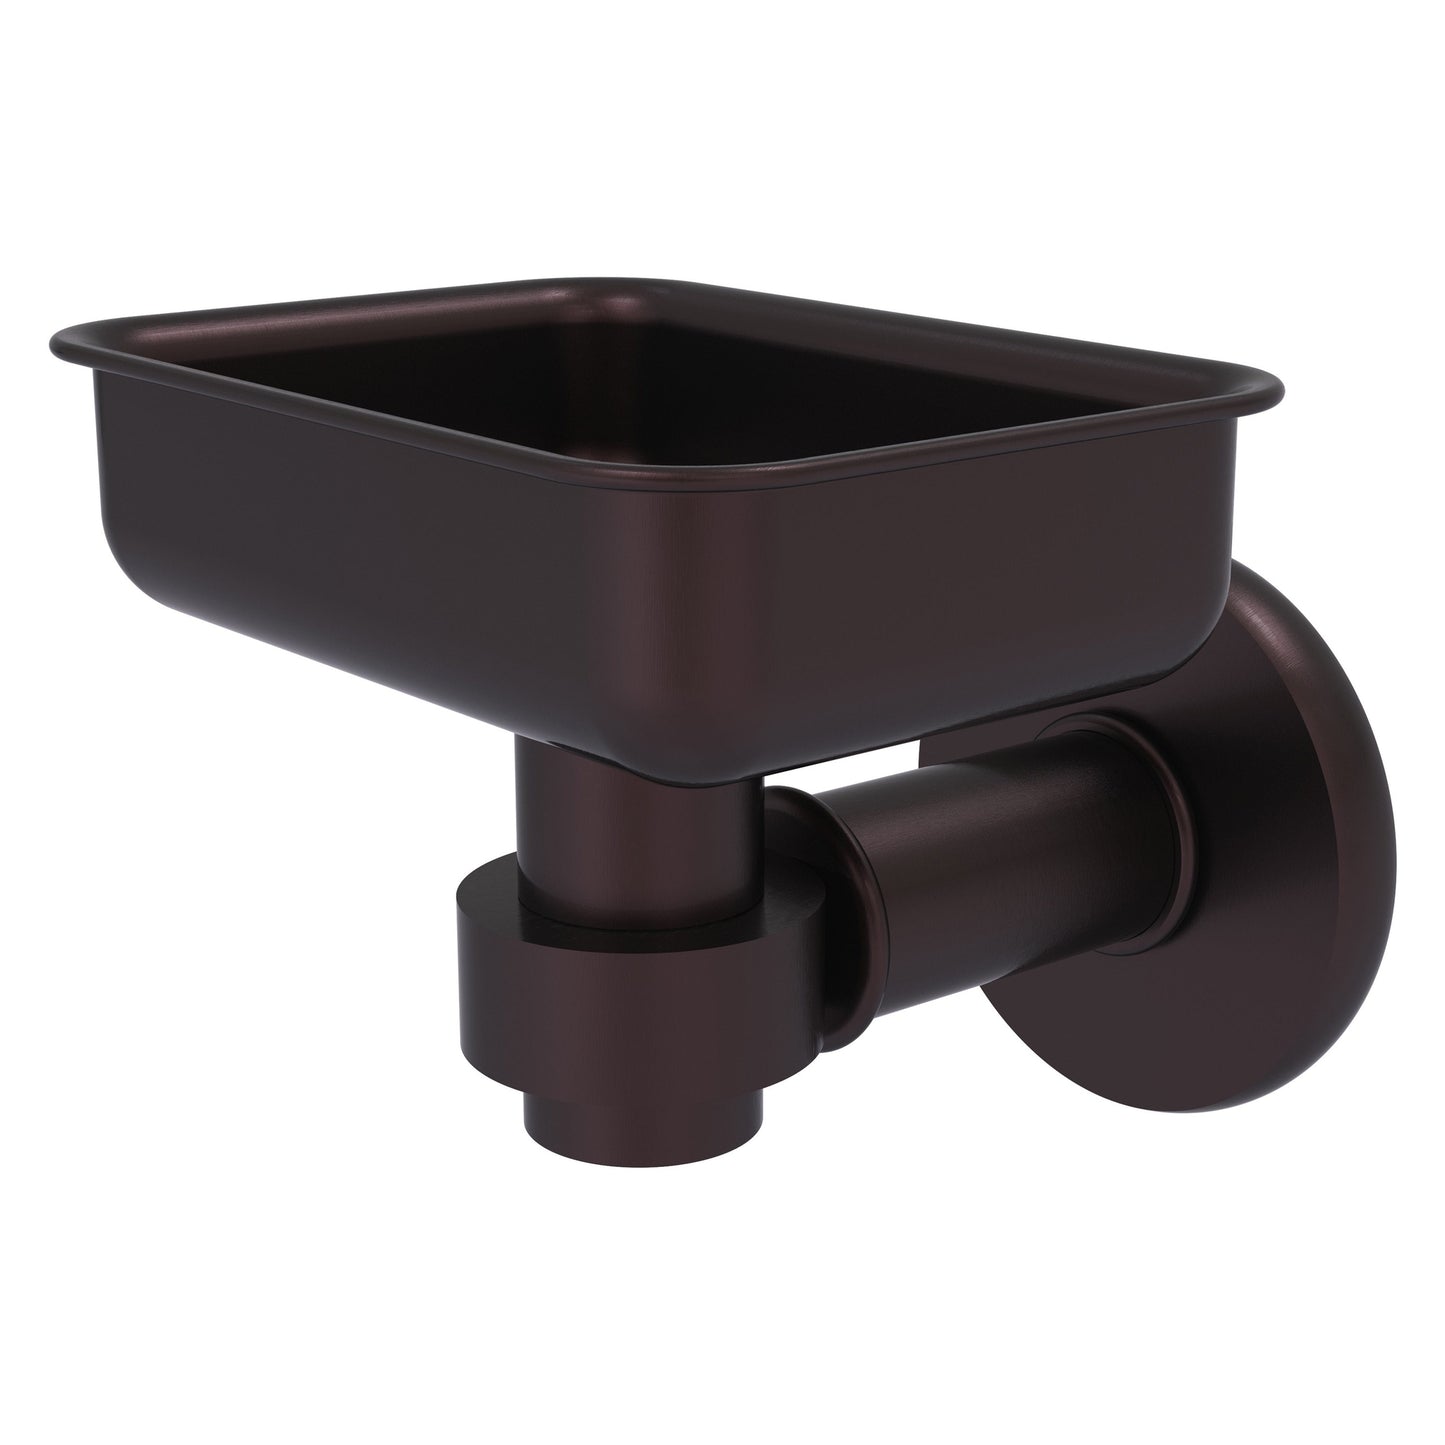 Allied Brass Continental 4.5" x 3.5" Antique Bronze Solid Brass Wall-Mounted Soap Dish Holder